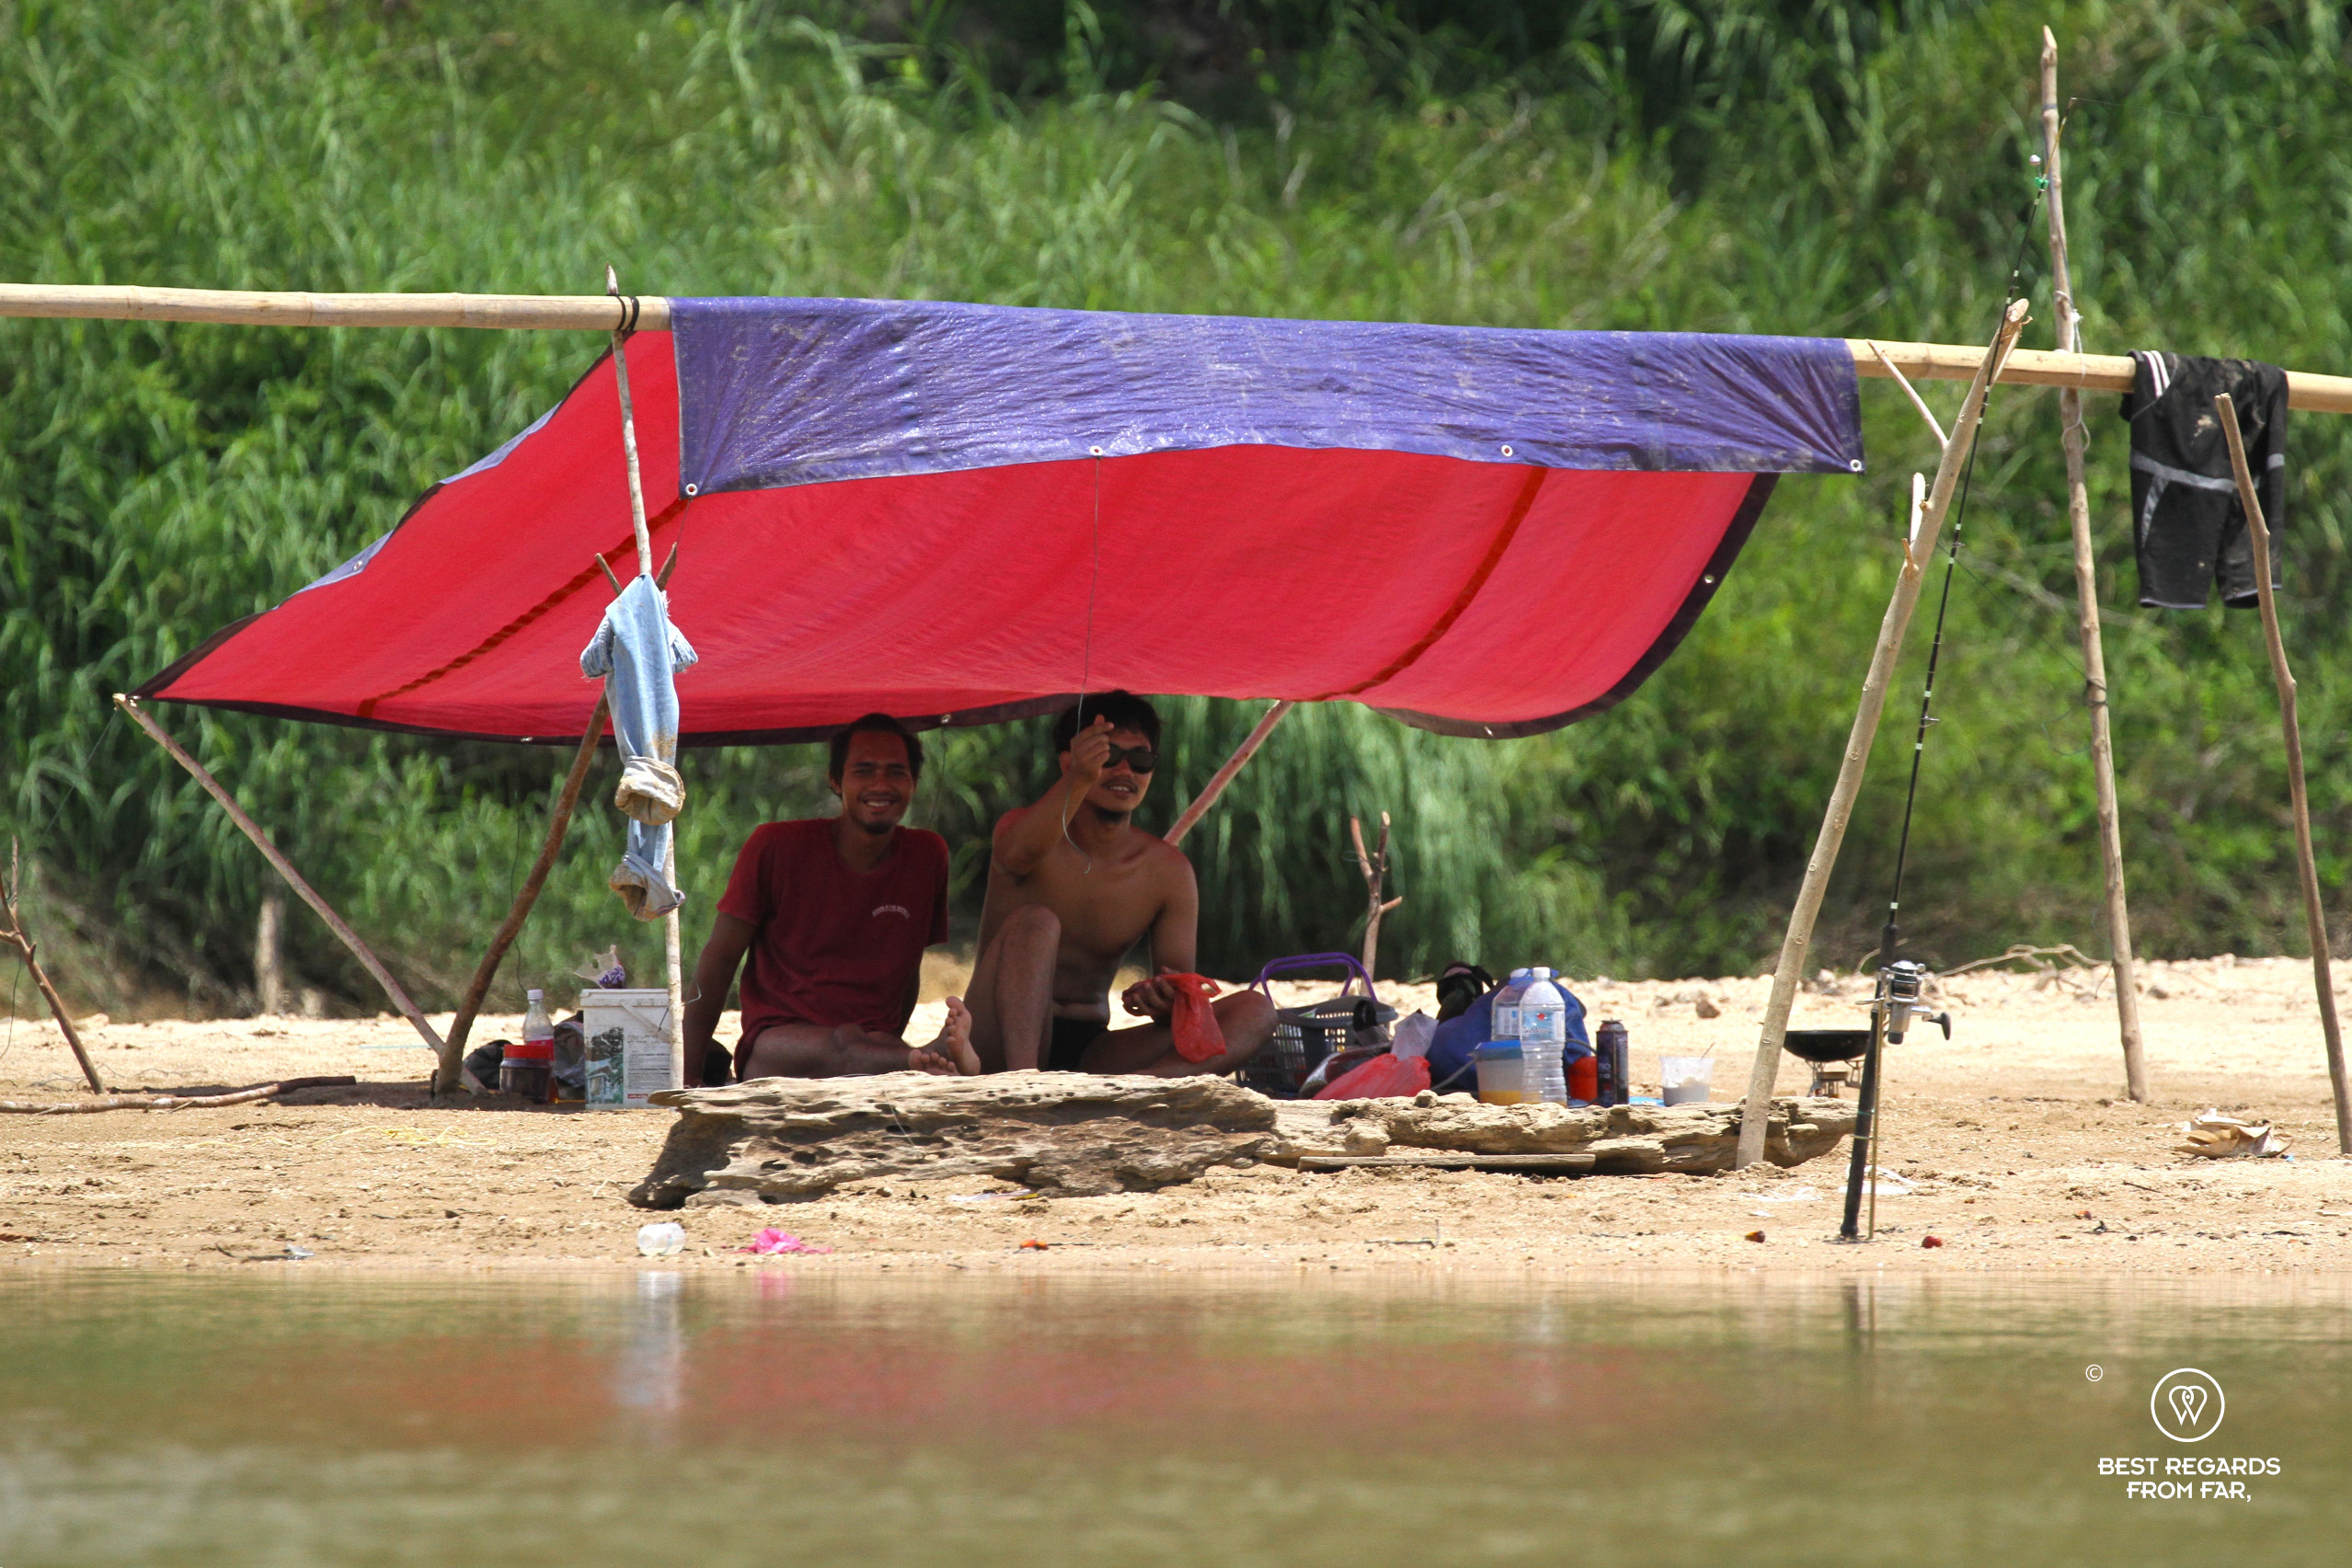 Two local fisherman waving from underneath a self-fabricated shelter along the Tembeling River.